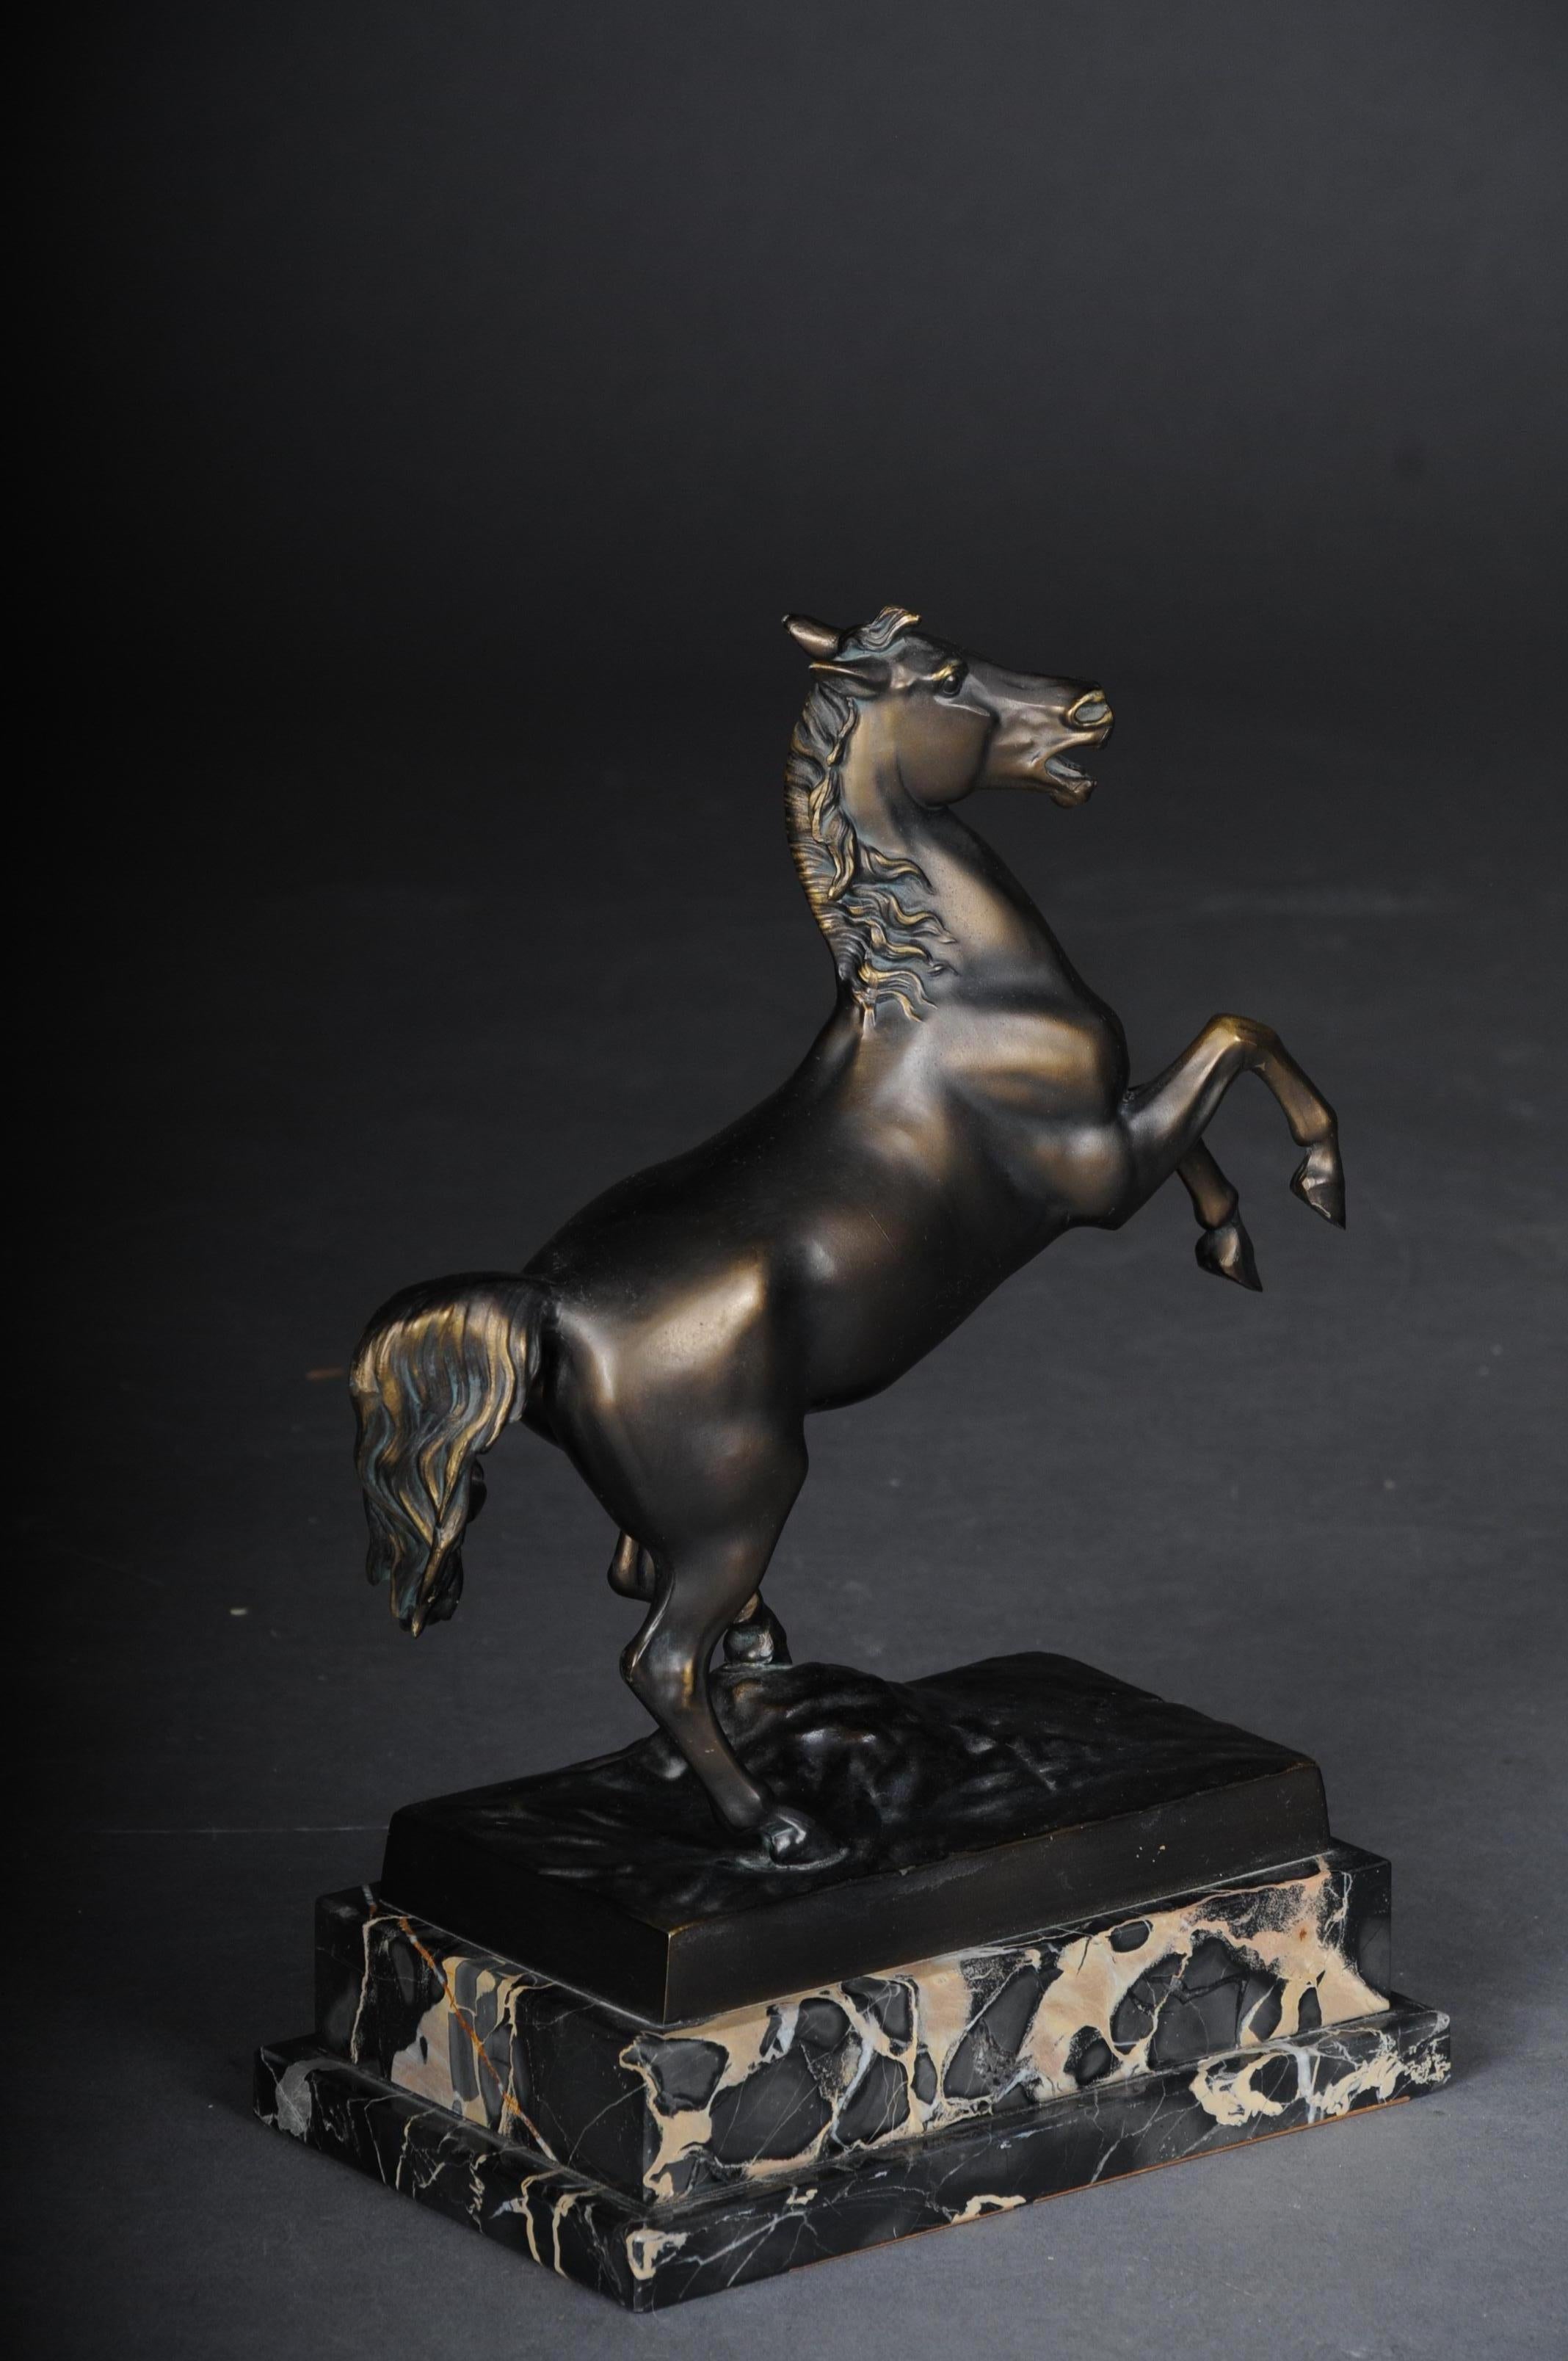 Horse sculpture / plastic bronze patented on marble base, circa 1920

Horse patinated in bronze. Aesthetic appearance of a horse on a black marble base, circa 1920.

(V-186).